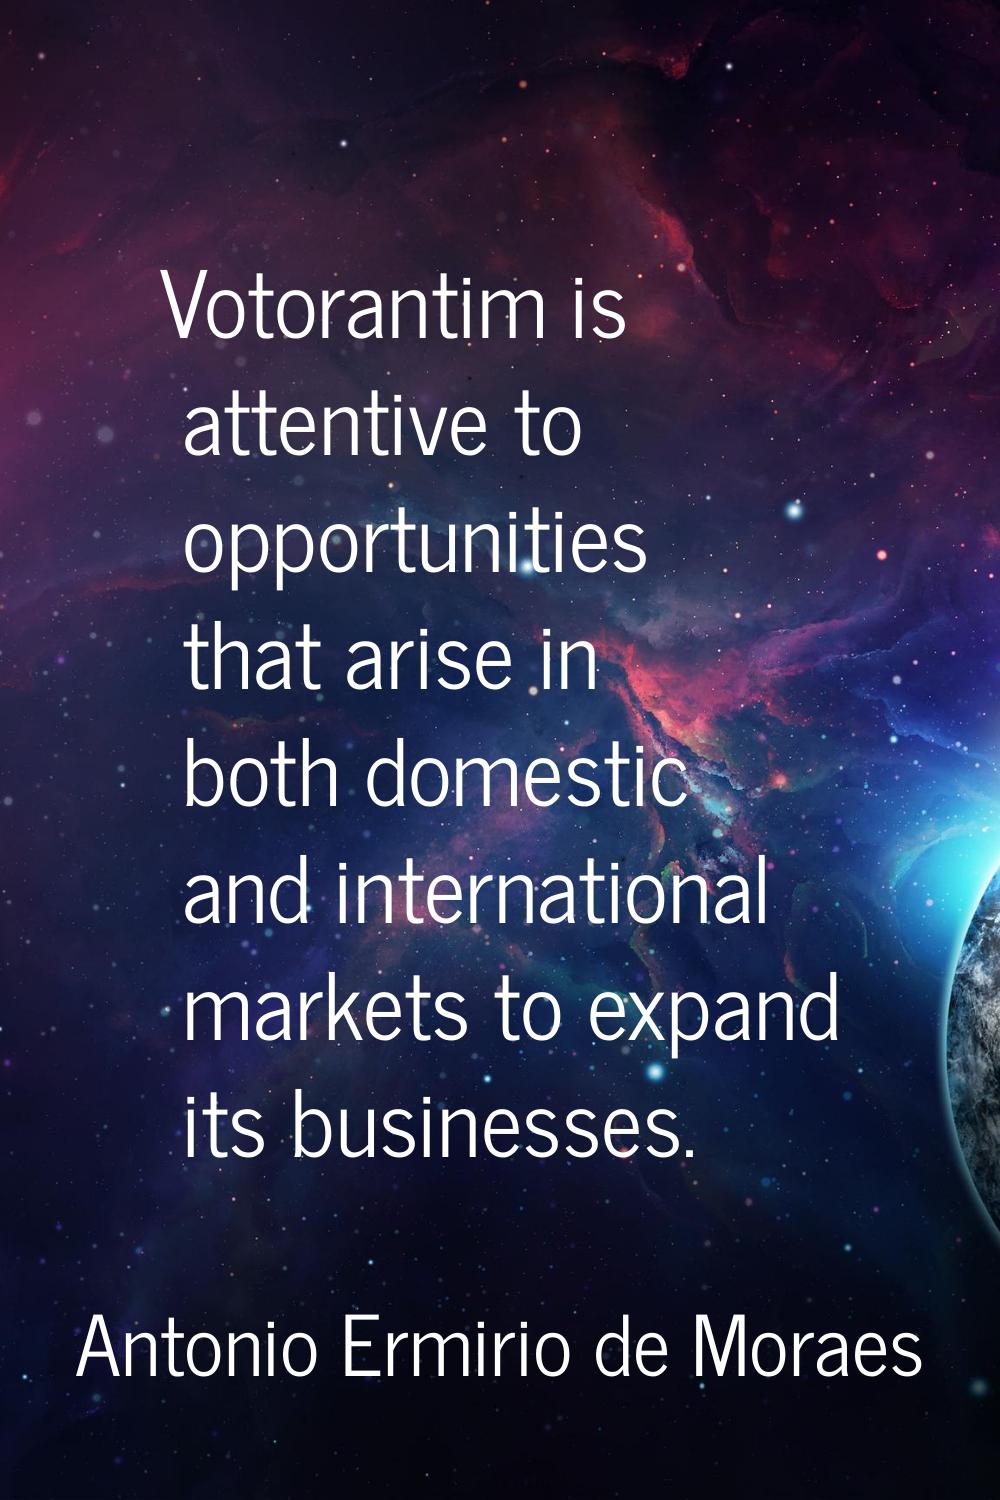 Votorantim is attentive to opportunities that arise in both domestic and international markets to e